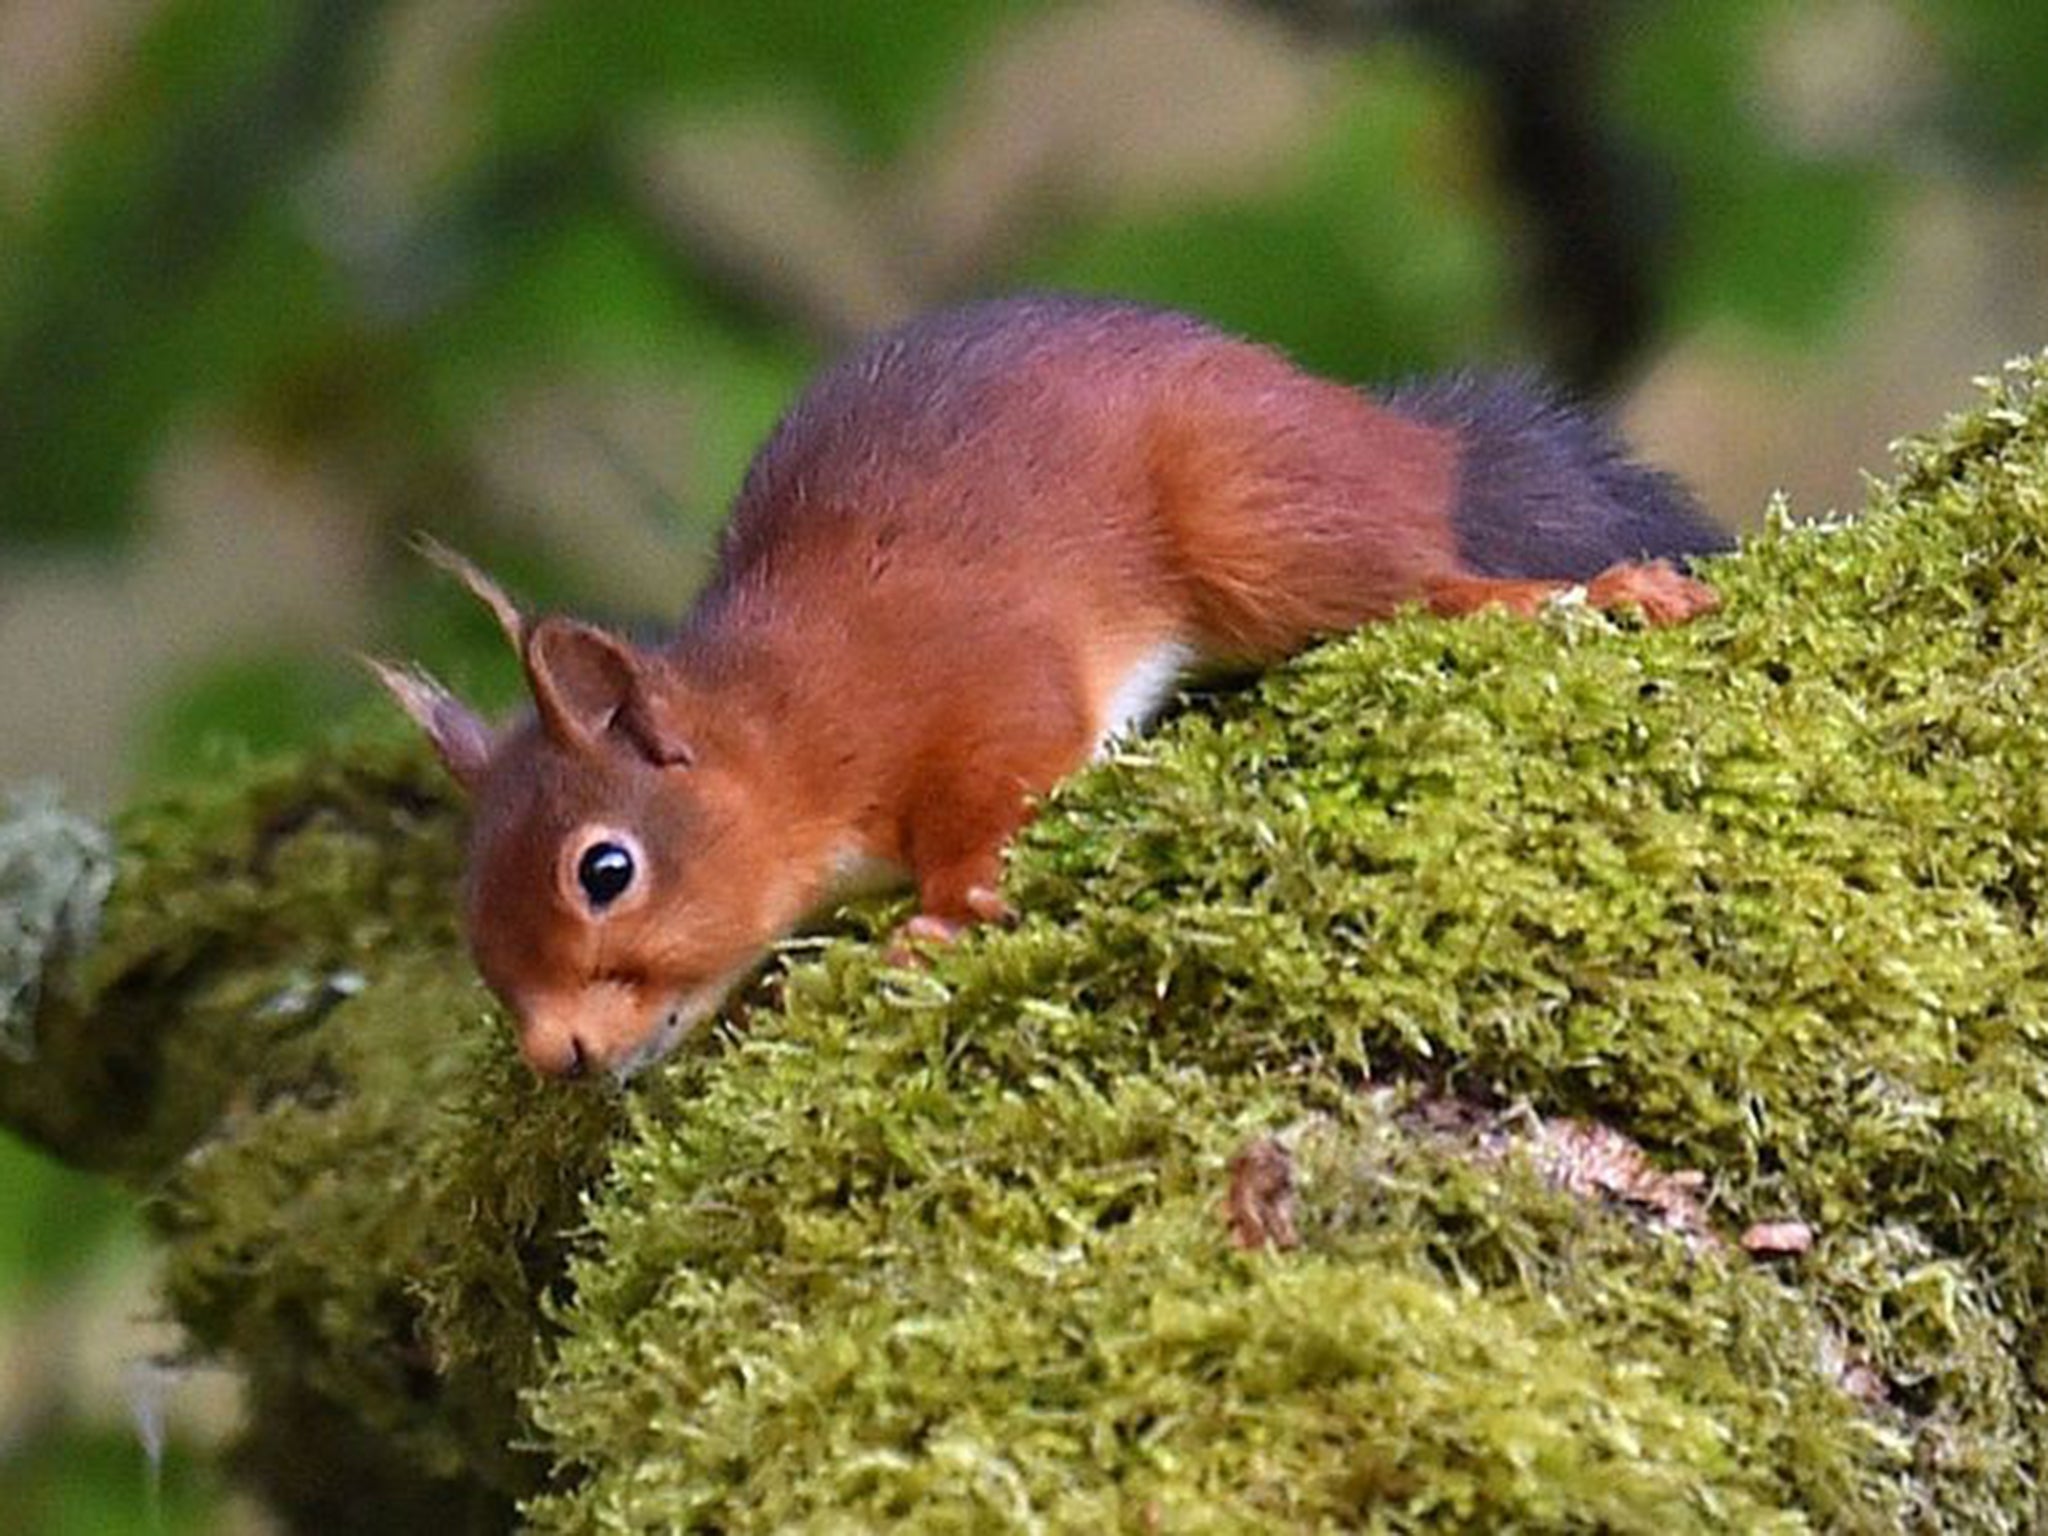 Numbers of red squirrels have fallen drastically to around 140,000 in the UK - with the majority in Scotland